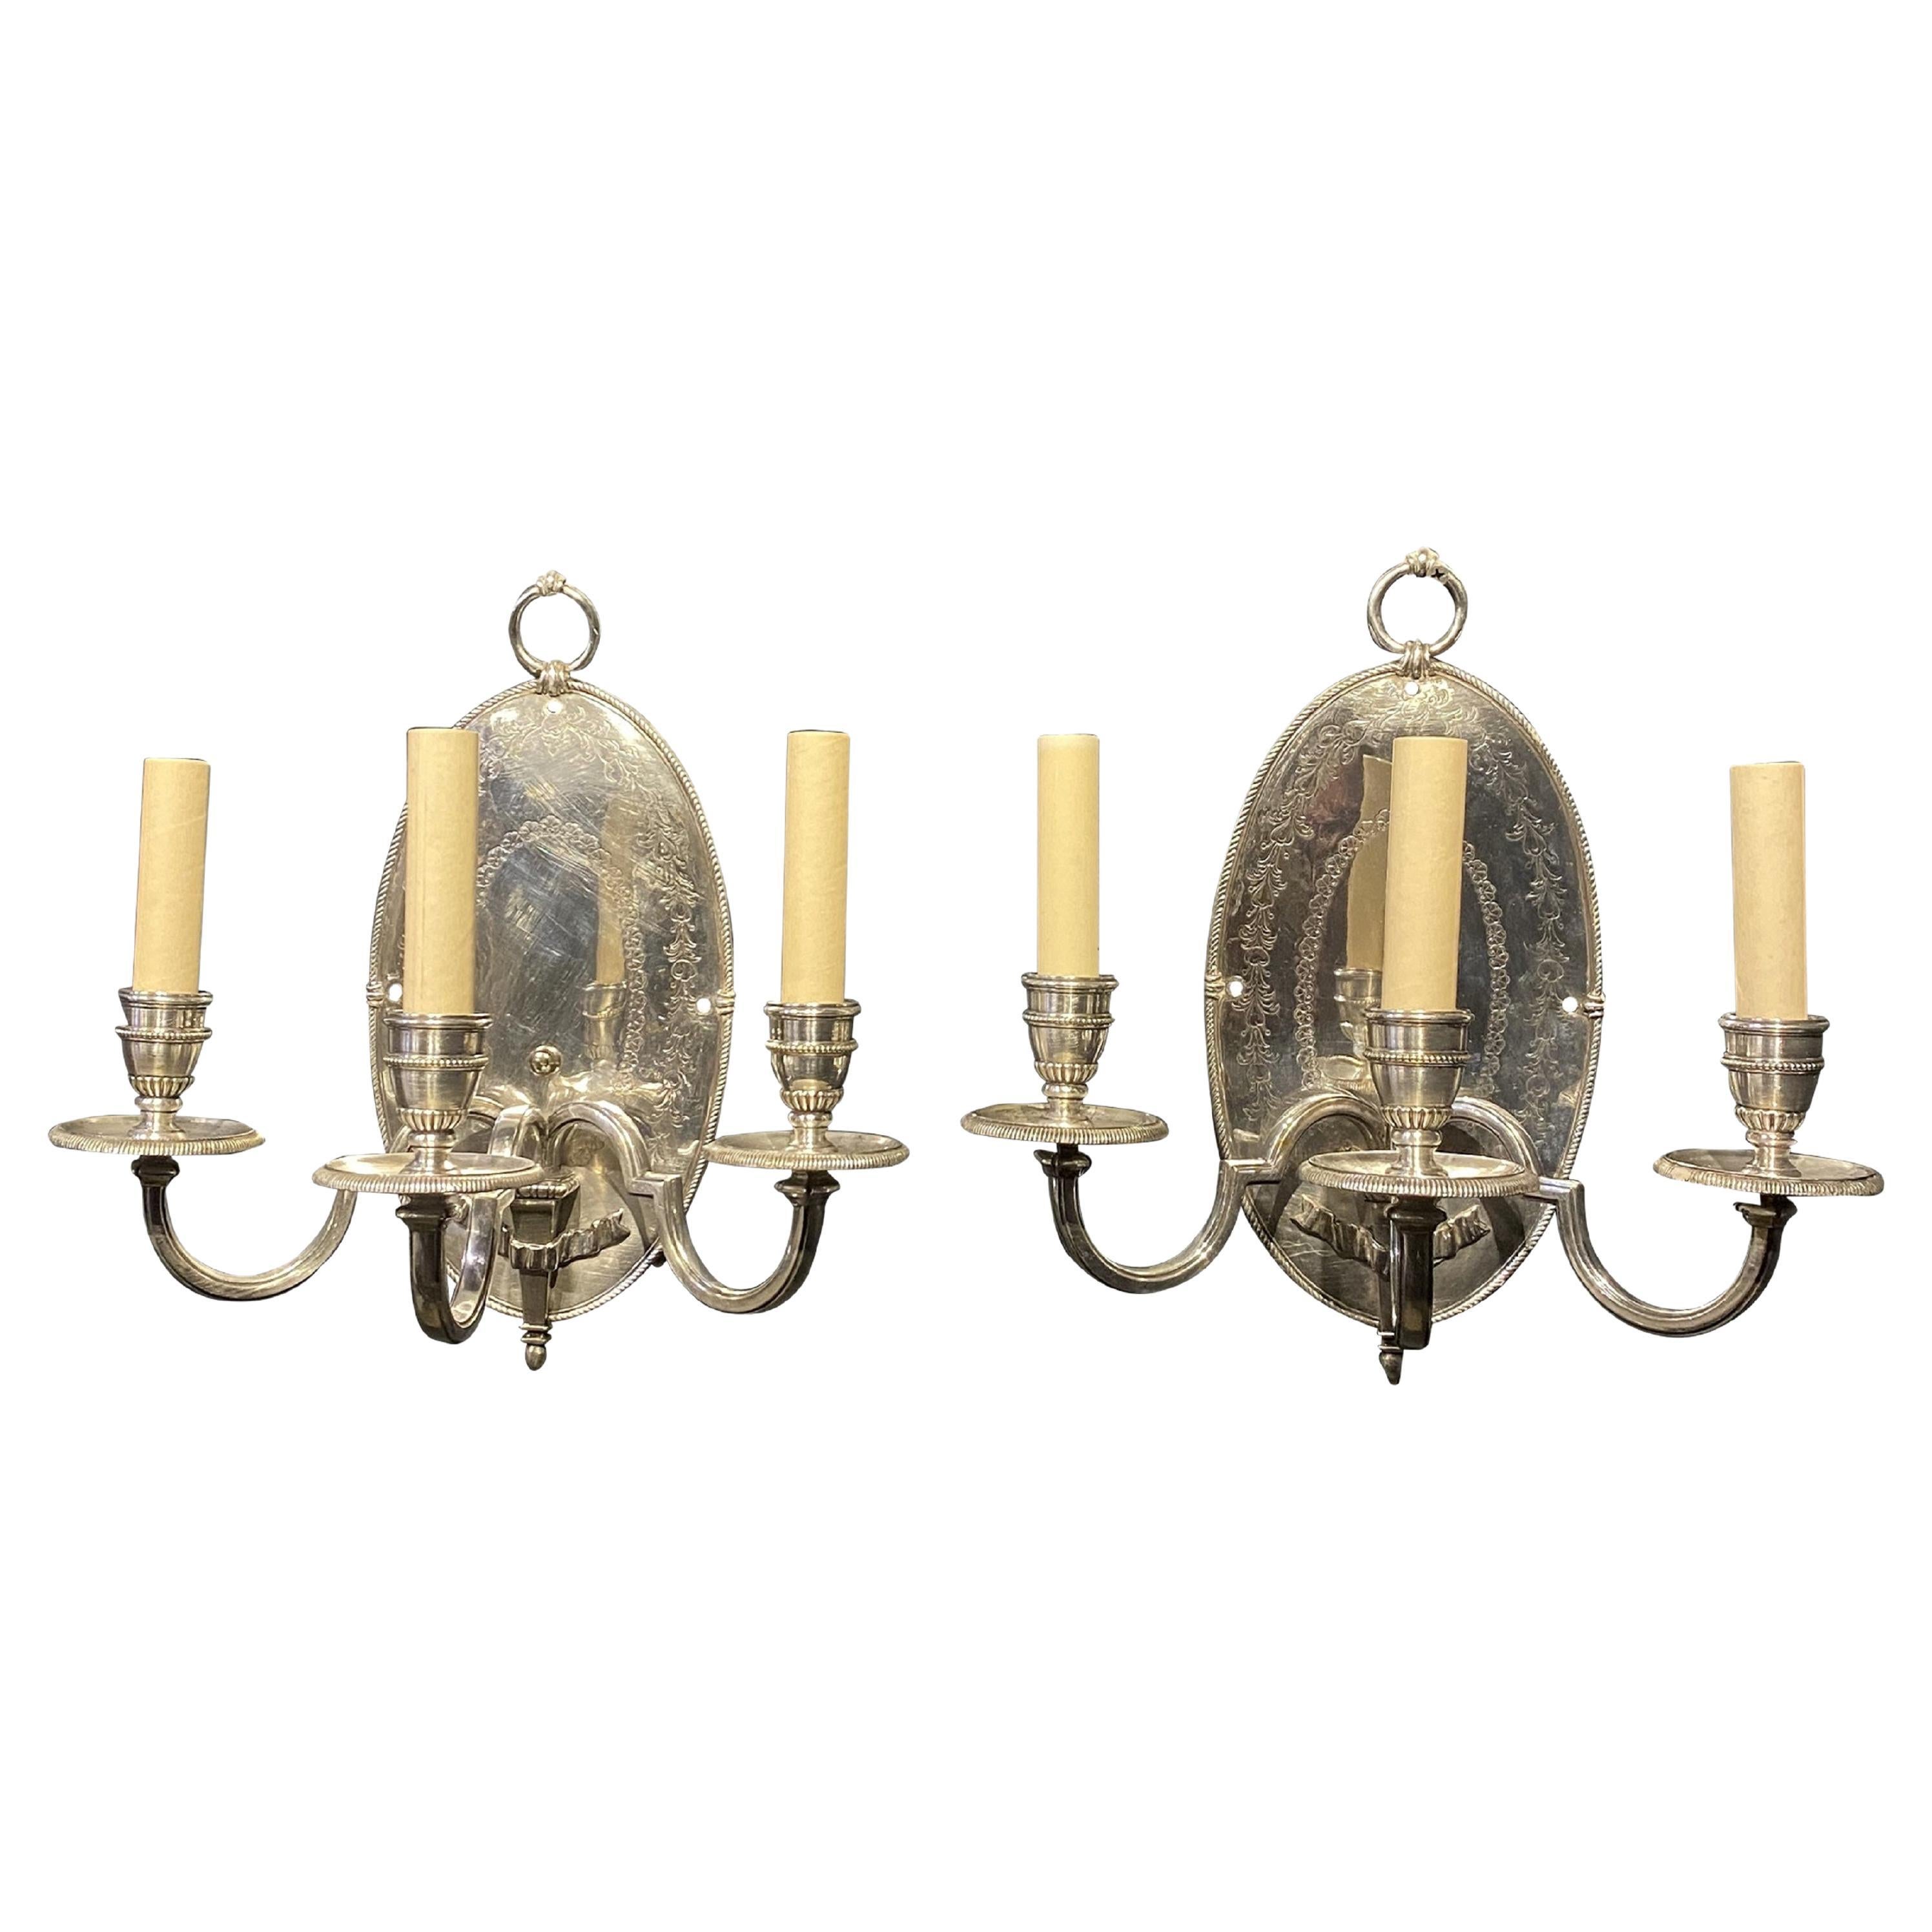 1900s Silver Plated Caldwell Sconces with three lights